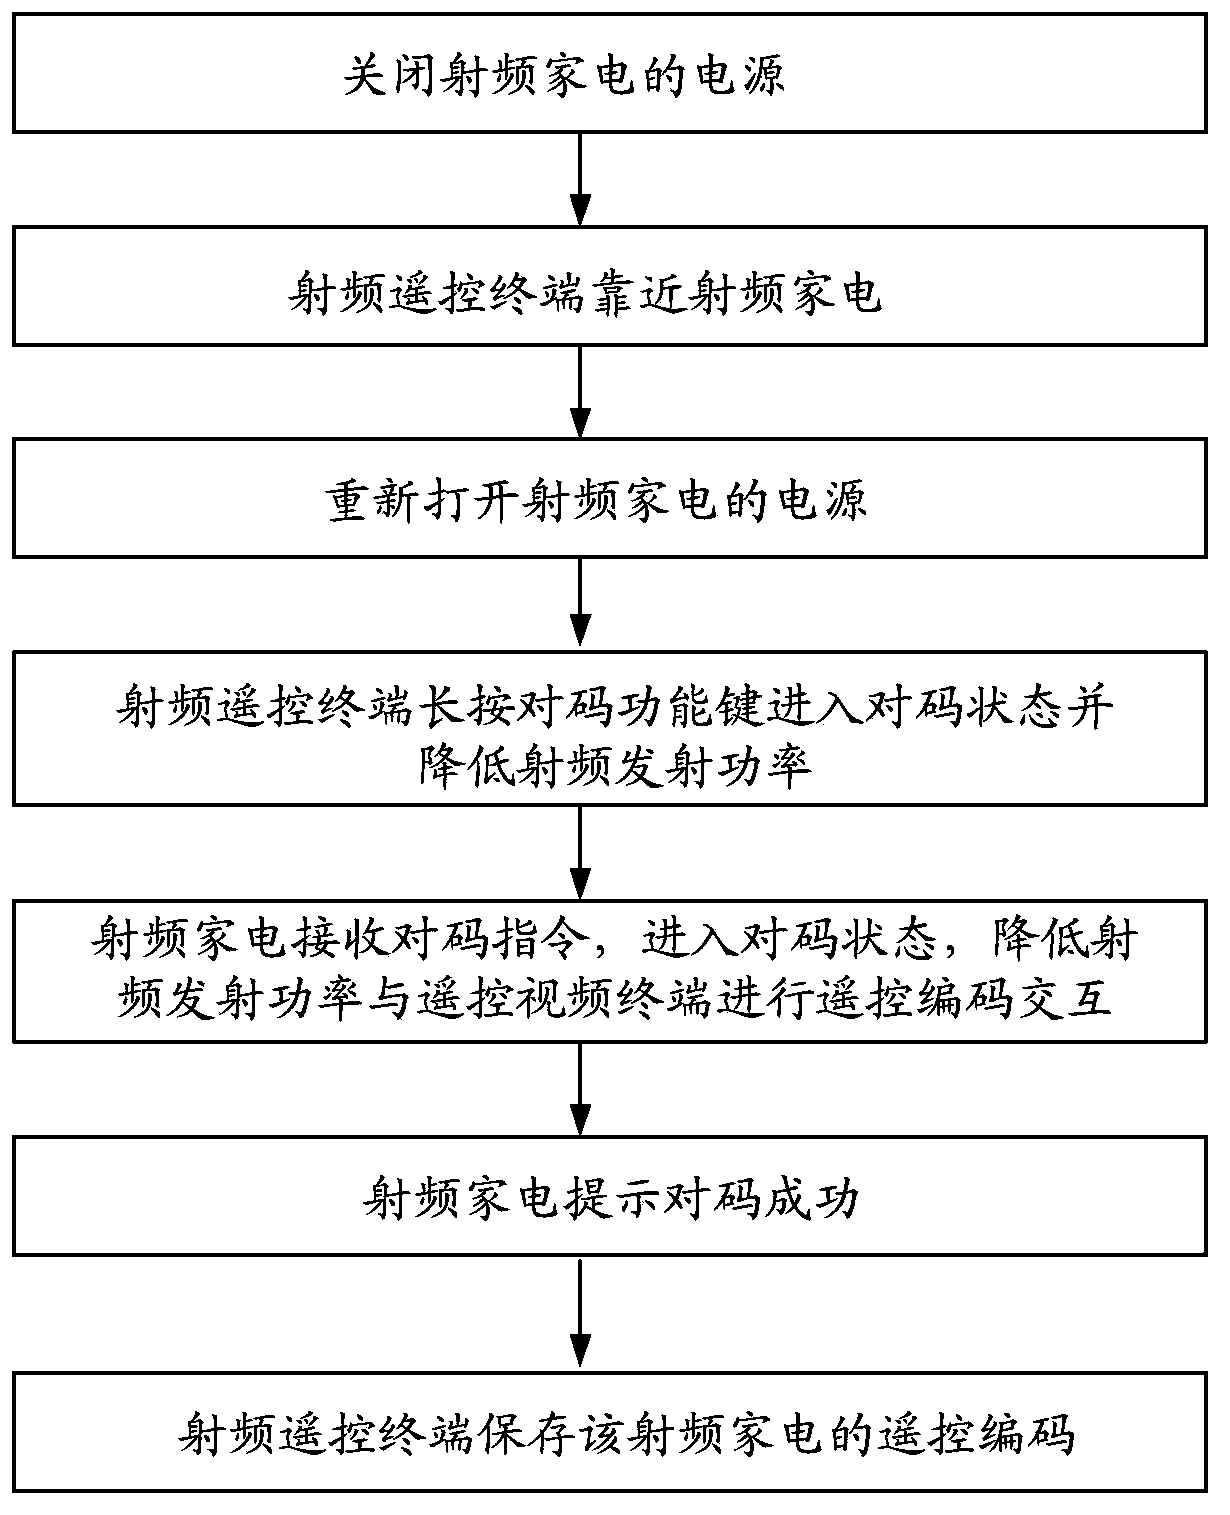 Radio frequency household appliance control method based on equipment barcode